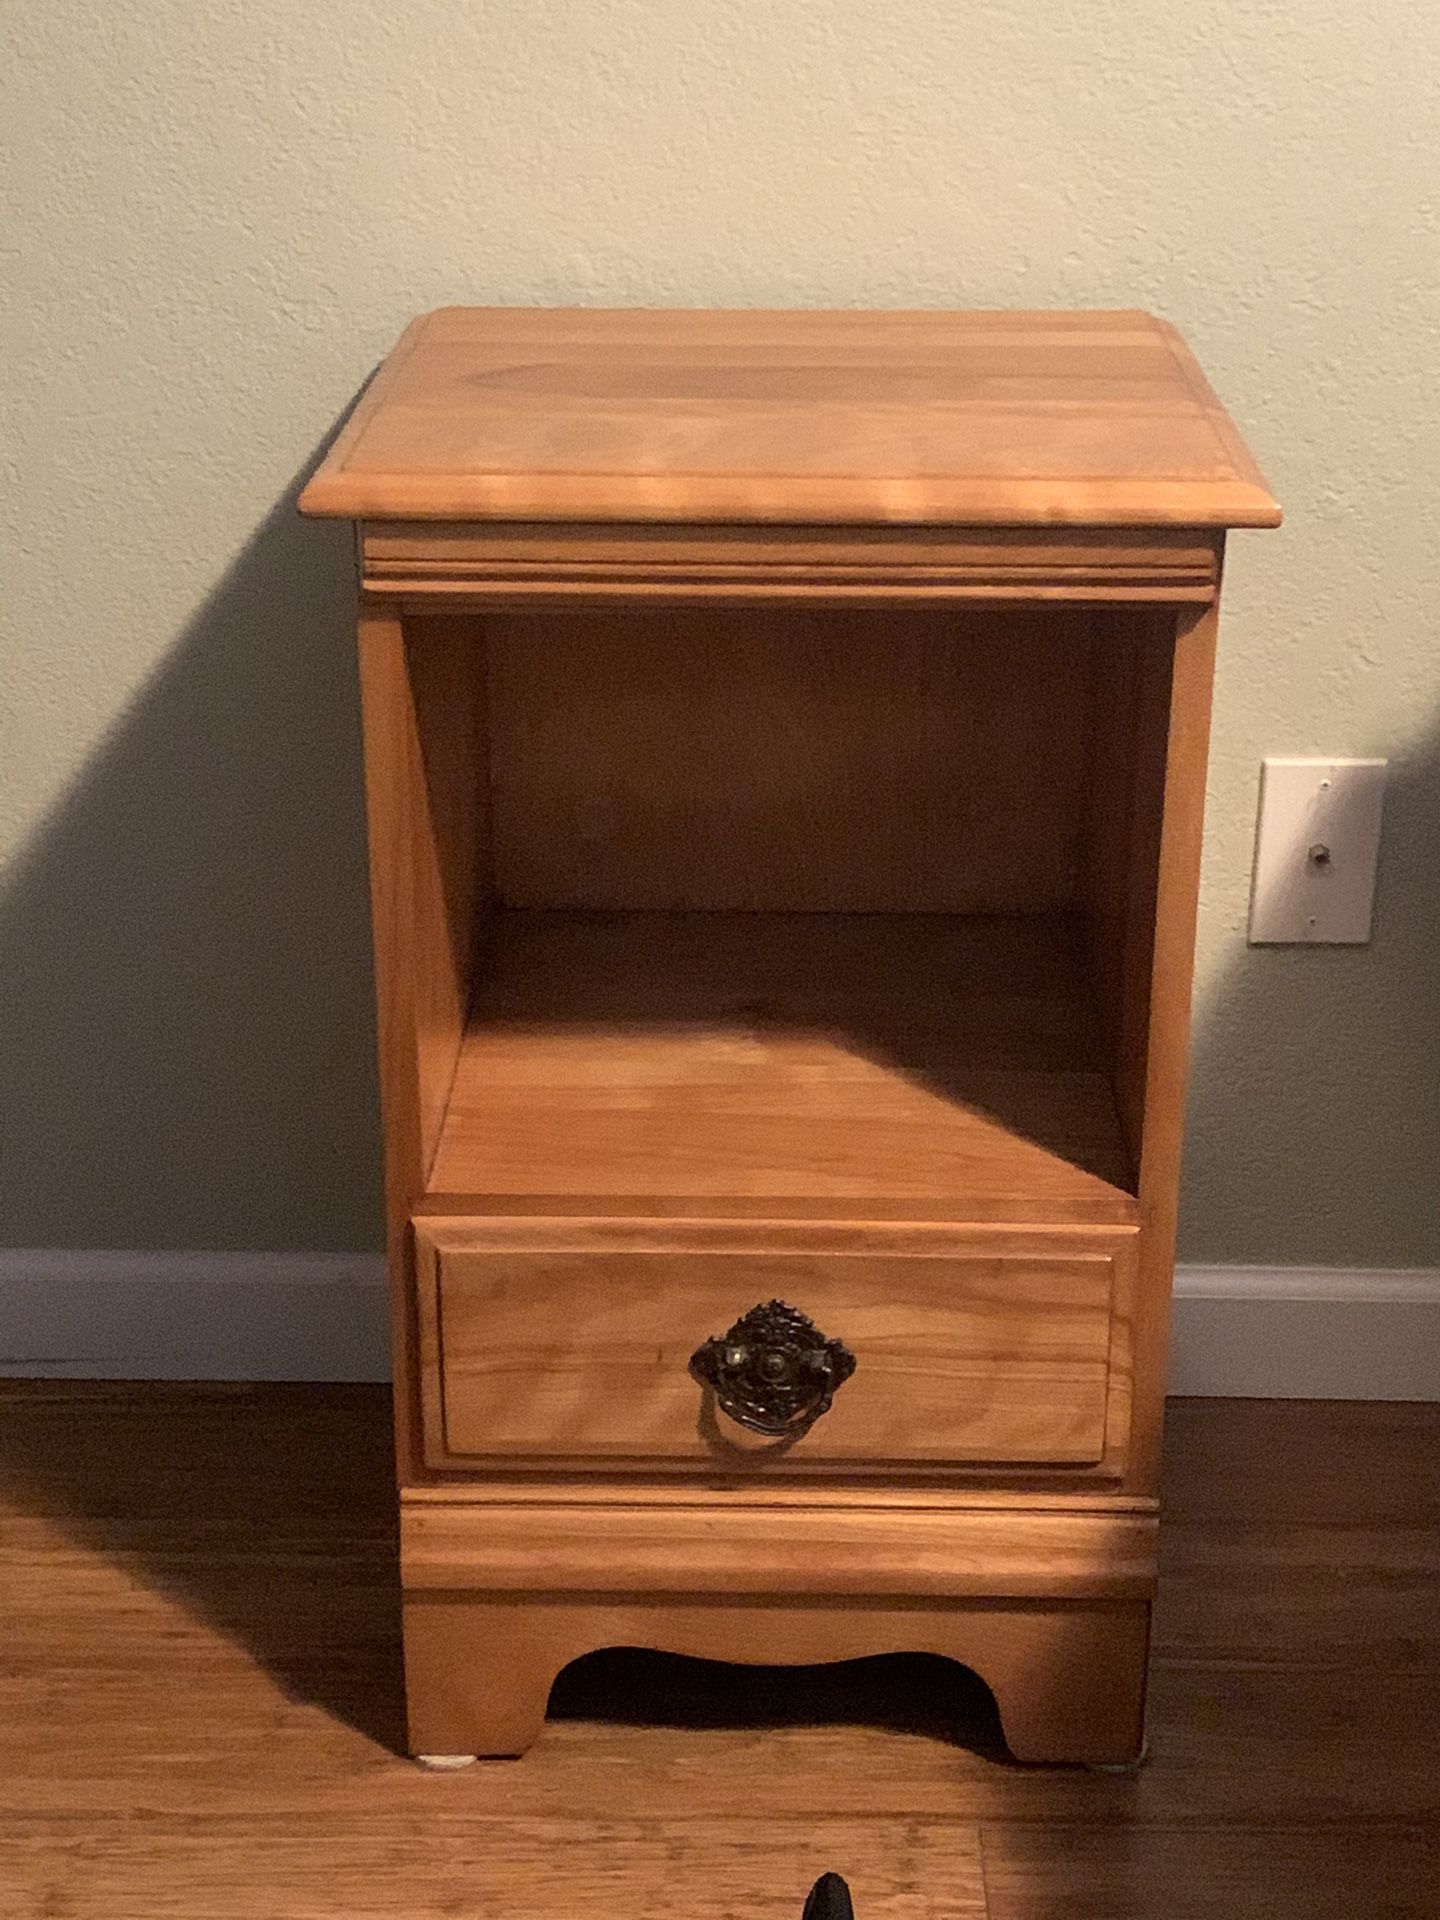 Antique Side drawer FREE if you pick up—no contact required